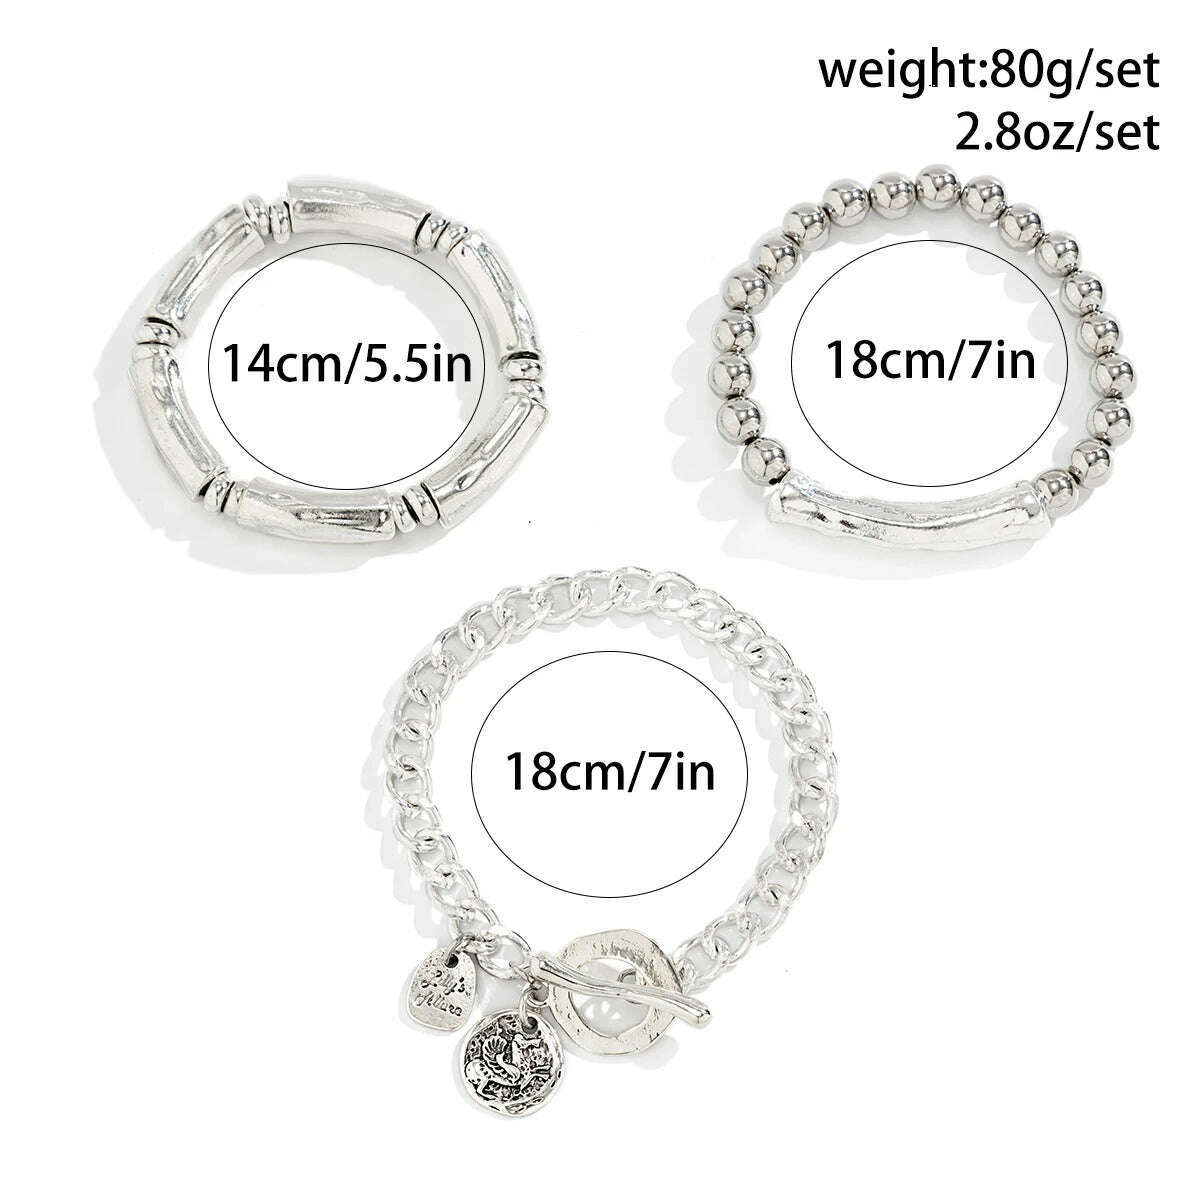 KIMLUD, Ingemark 4Pcs/Set Vintage OT Buckle Coin Pendant Bracelet for Women on Hand Goth Open Charm Bangles Couple Friends Jewelry Gift, KIMLUD Women's Clothes